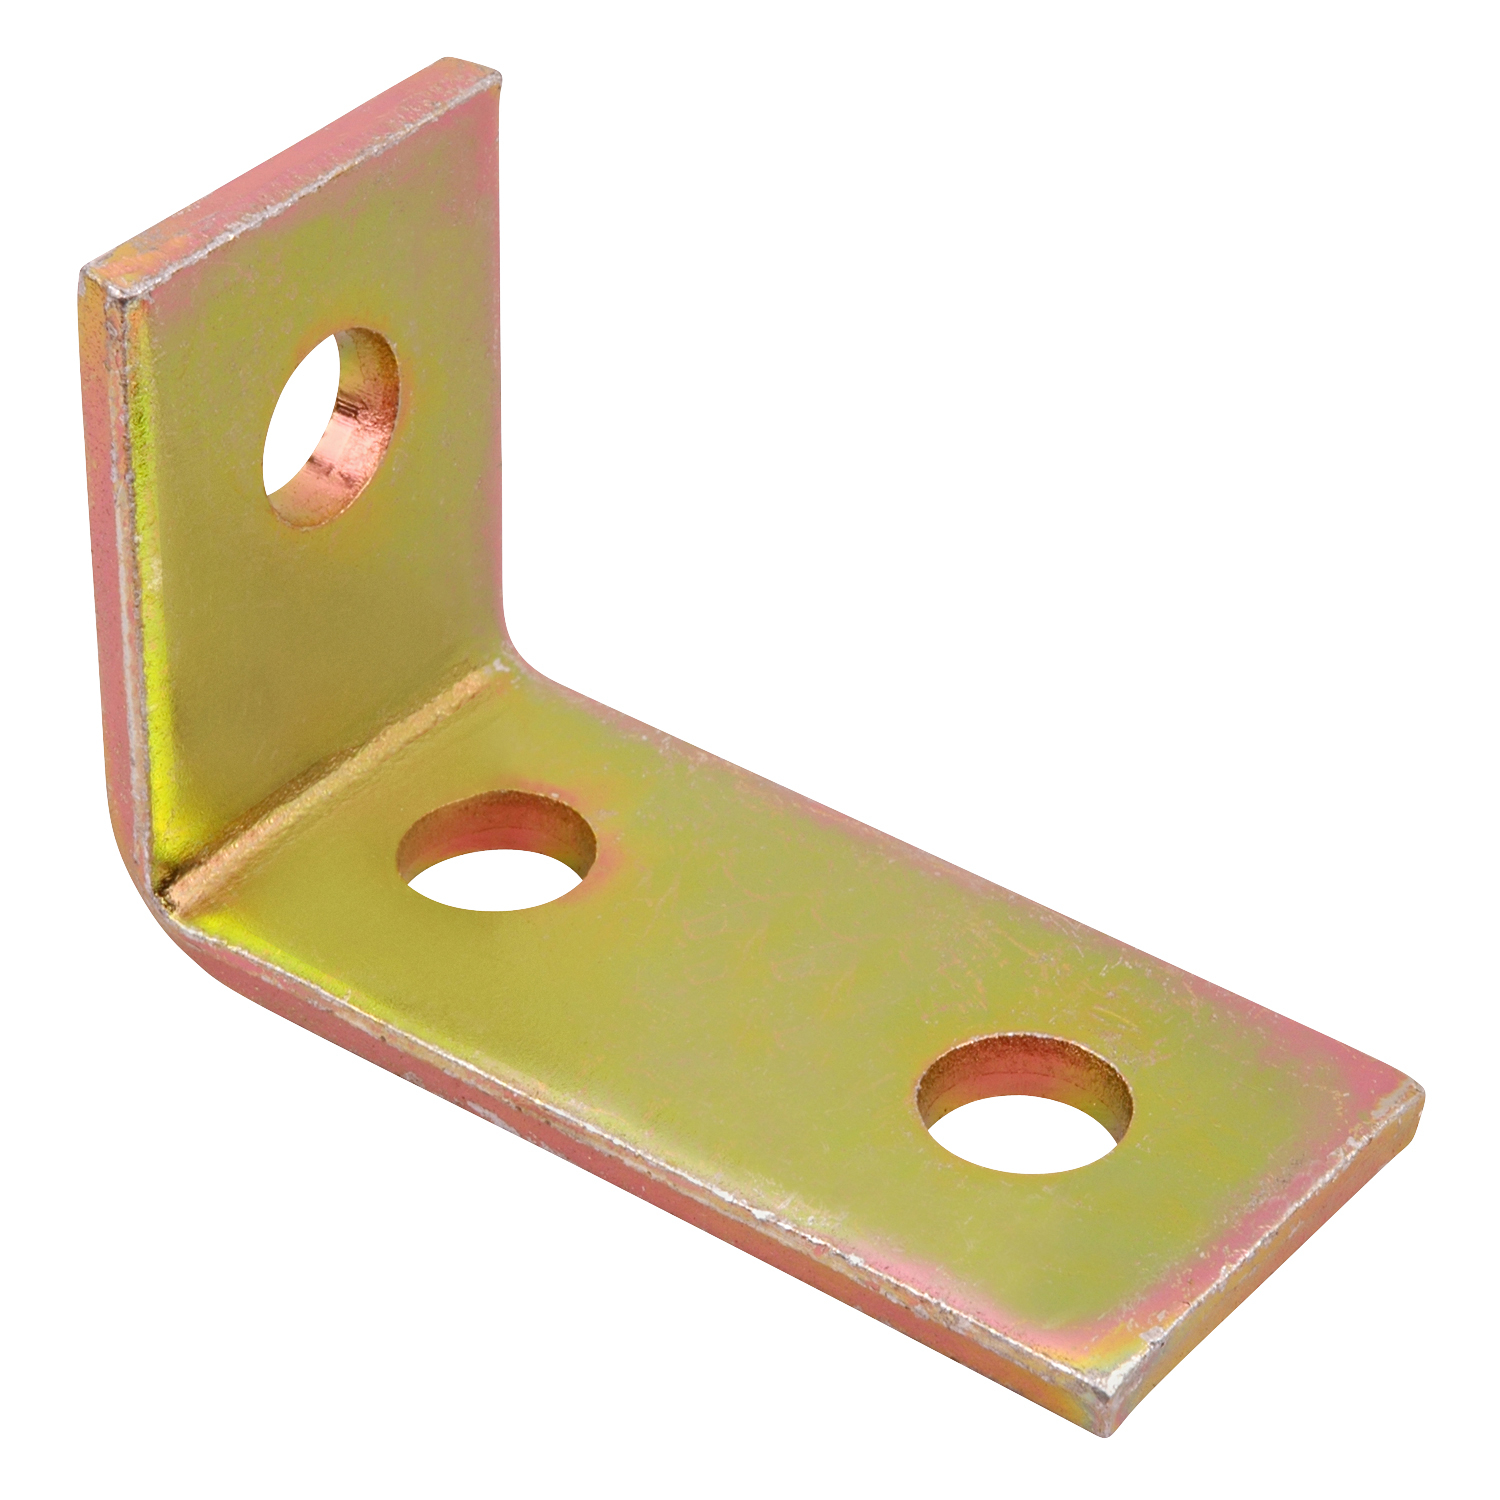 AB203 Channel Angle Bracket Superstrut;ABB - Installation Products